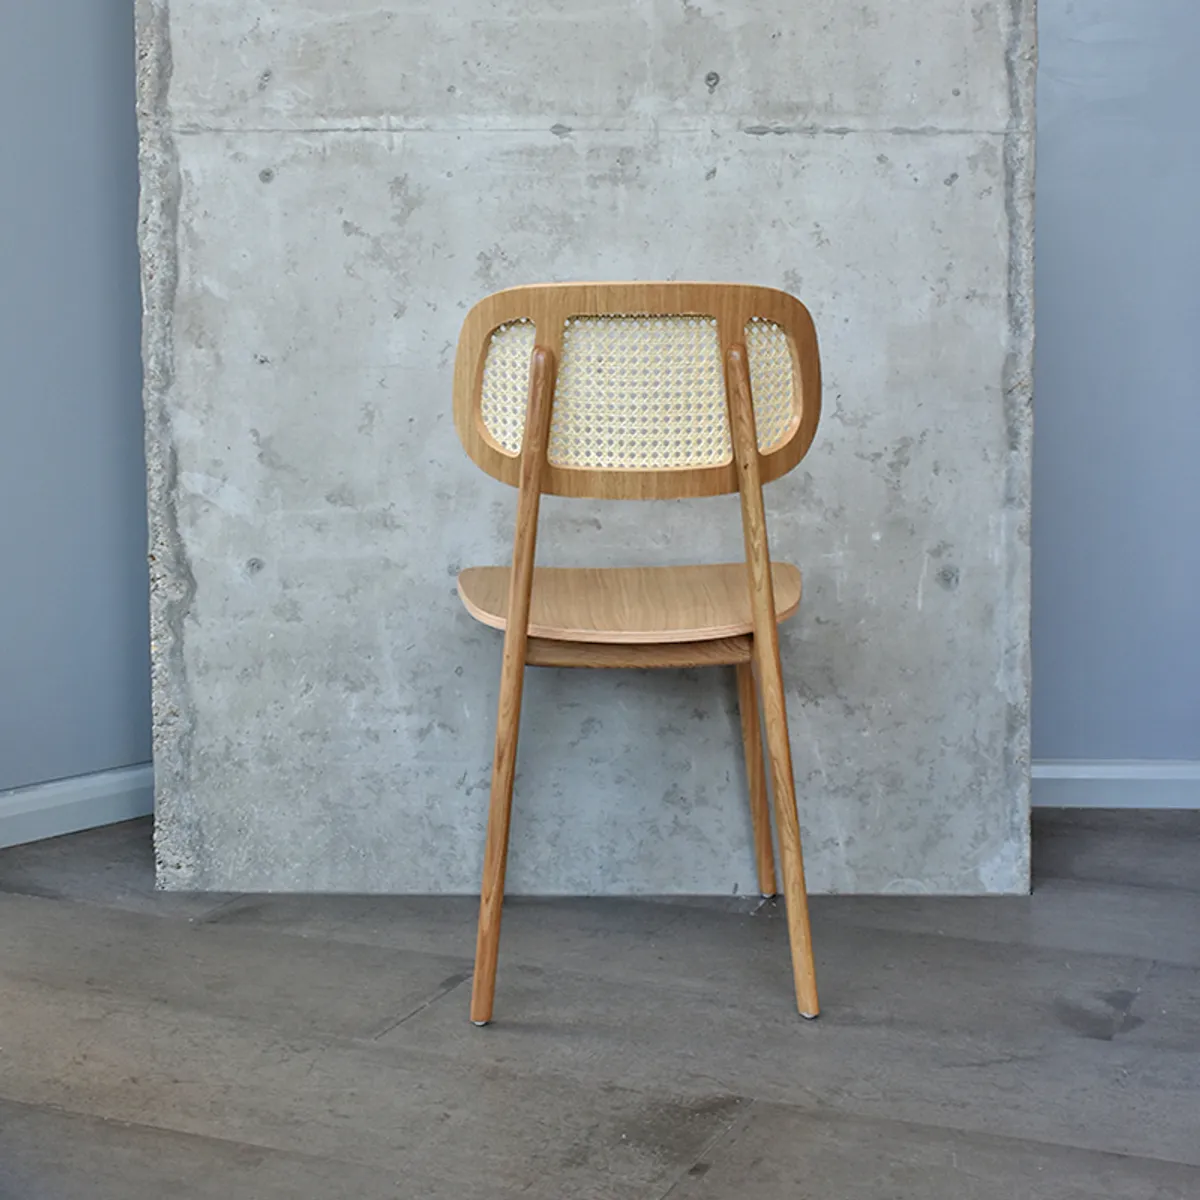 Moby Cane Chair New Furniture From Milan 2019 By Inside Out Contracts 010